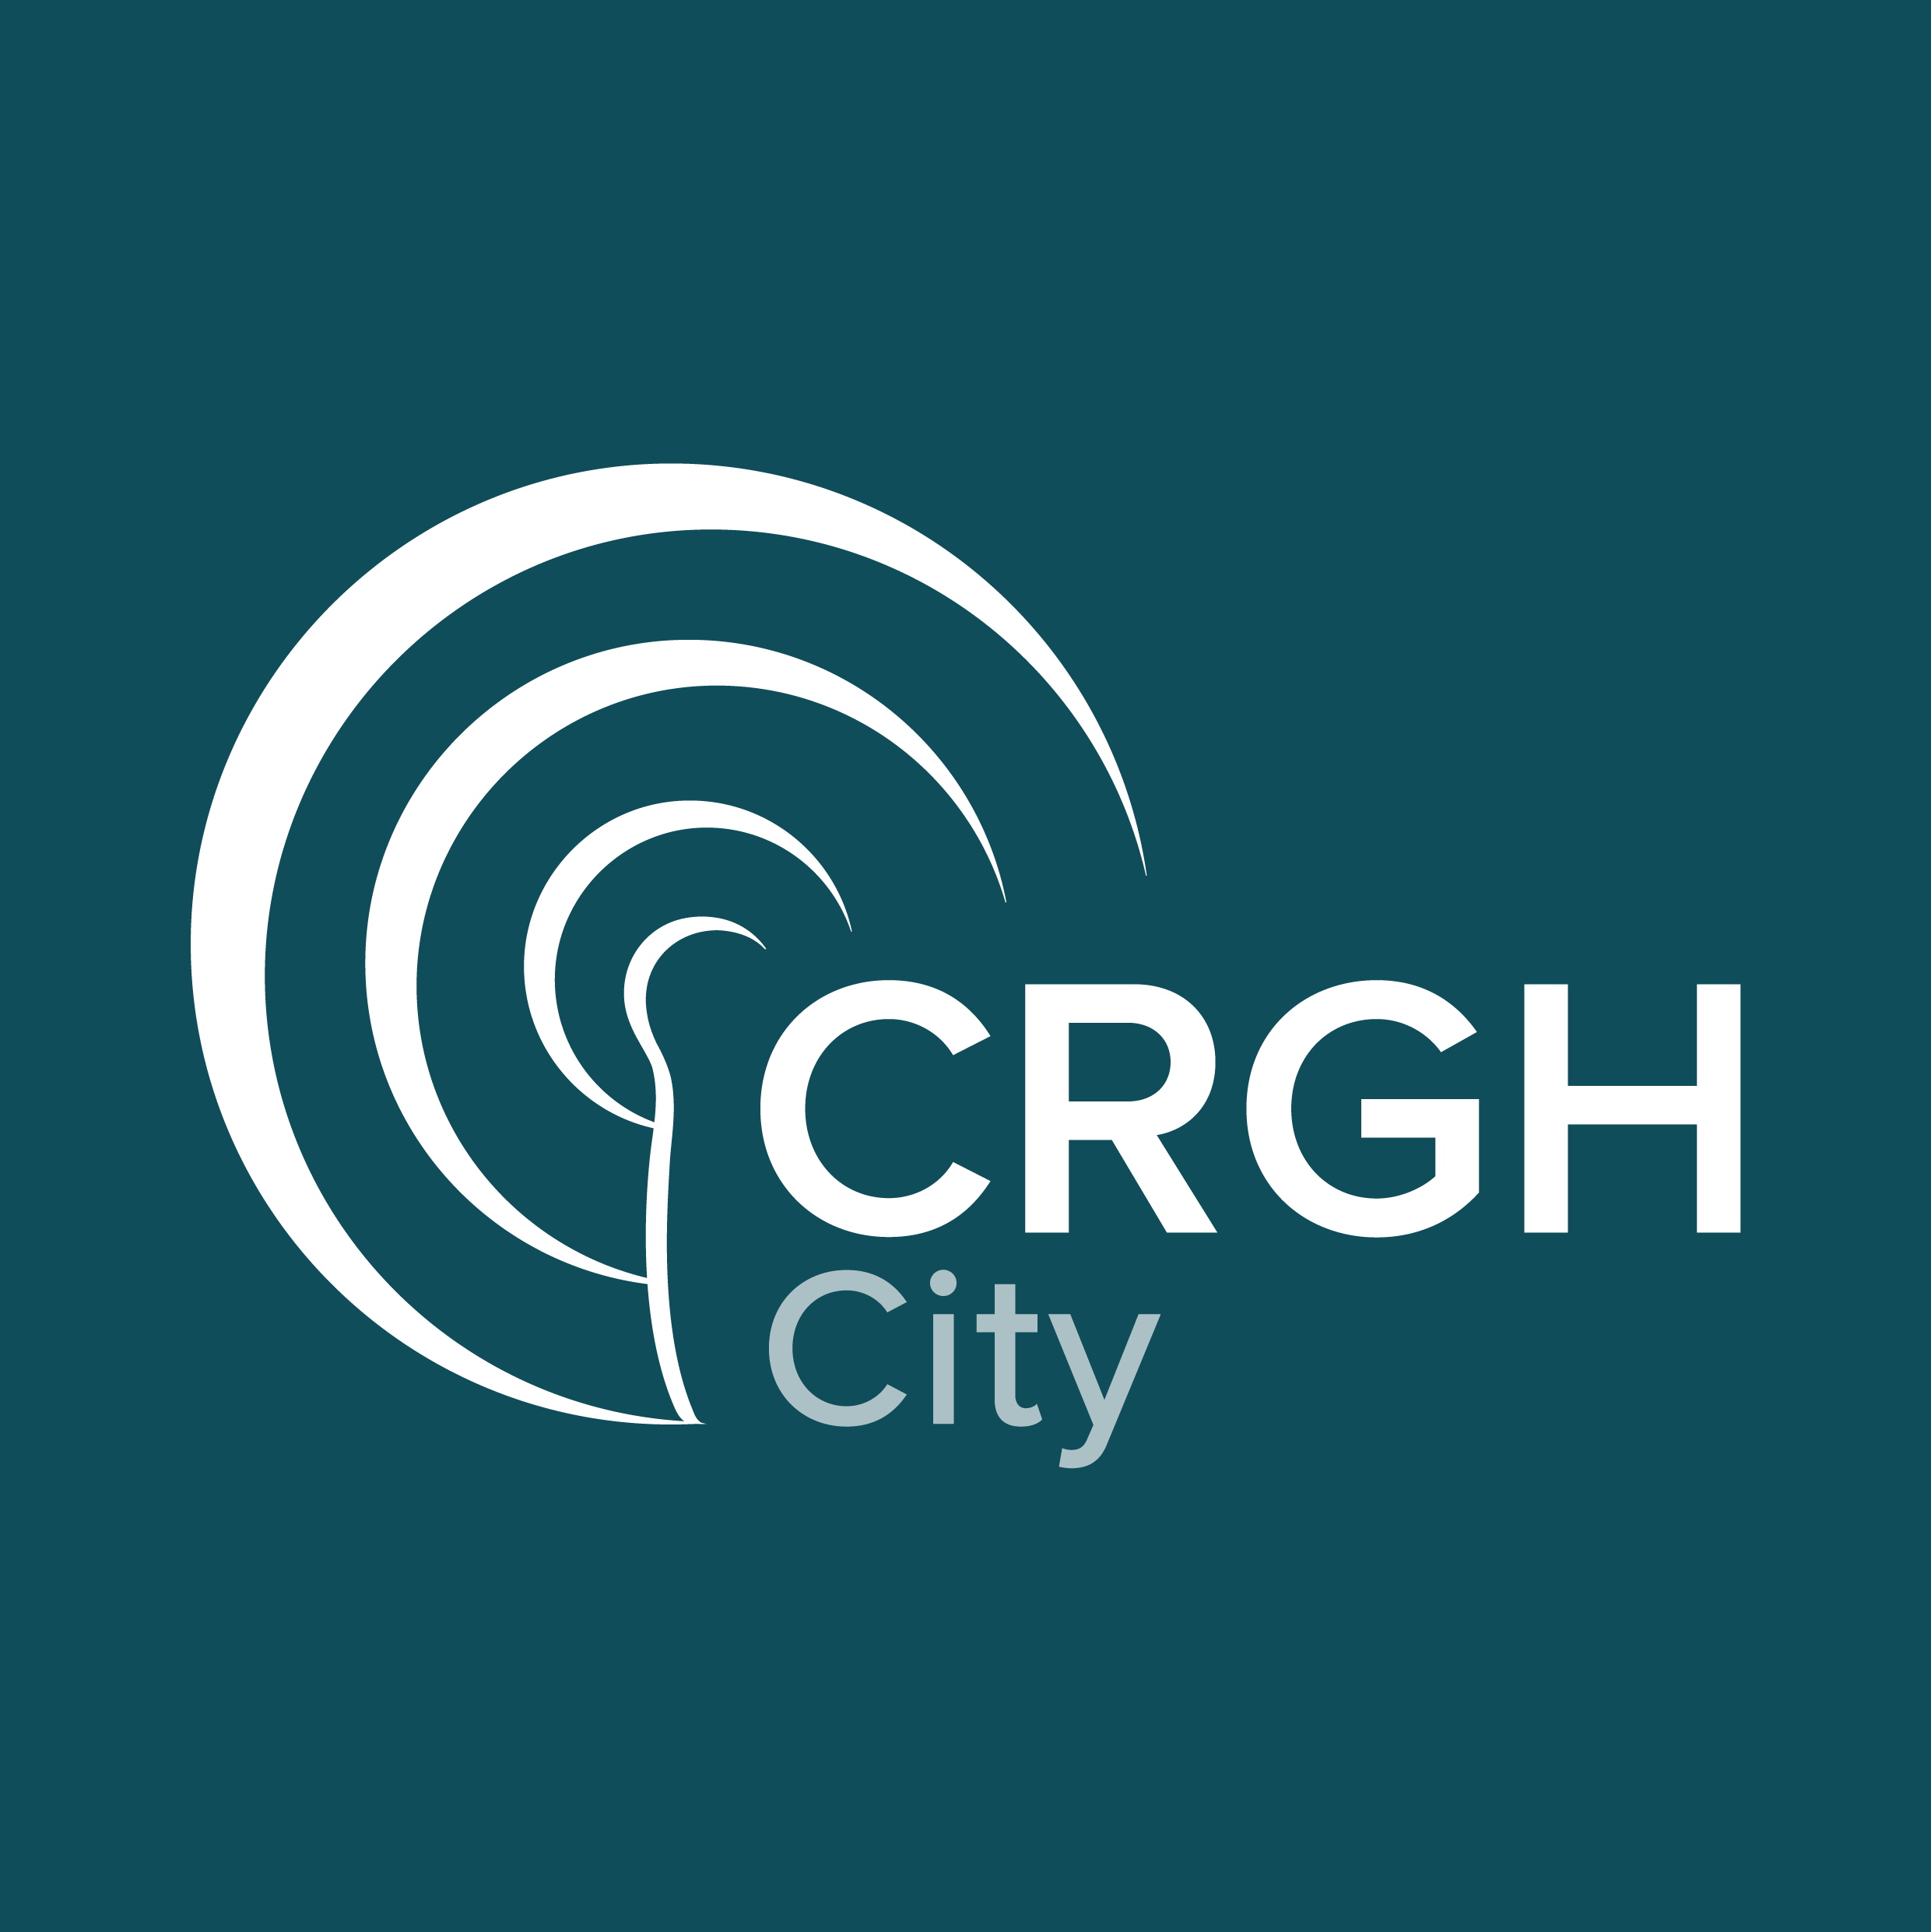 CRGH City, located for people working in London's financial and business district.